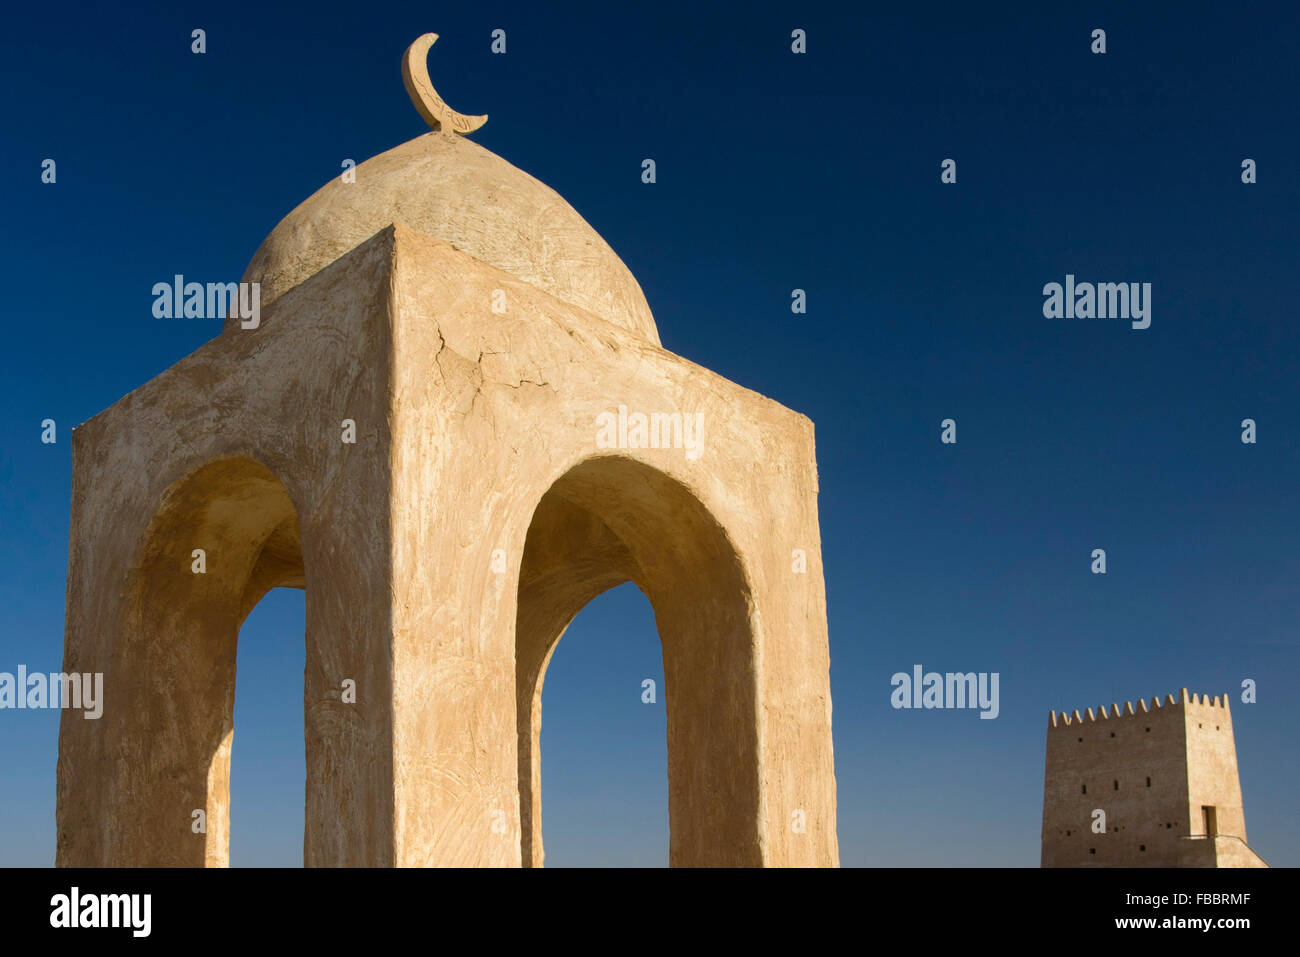 Barzan Towers  Umm Salal Mohammed Fort Towers, watchtowers in Doha Qatar with mosque architecture and crescent moon Stock Photo